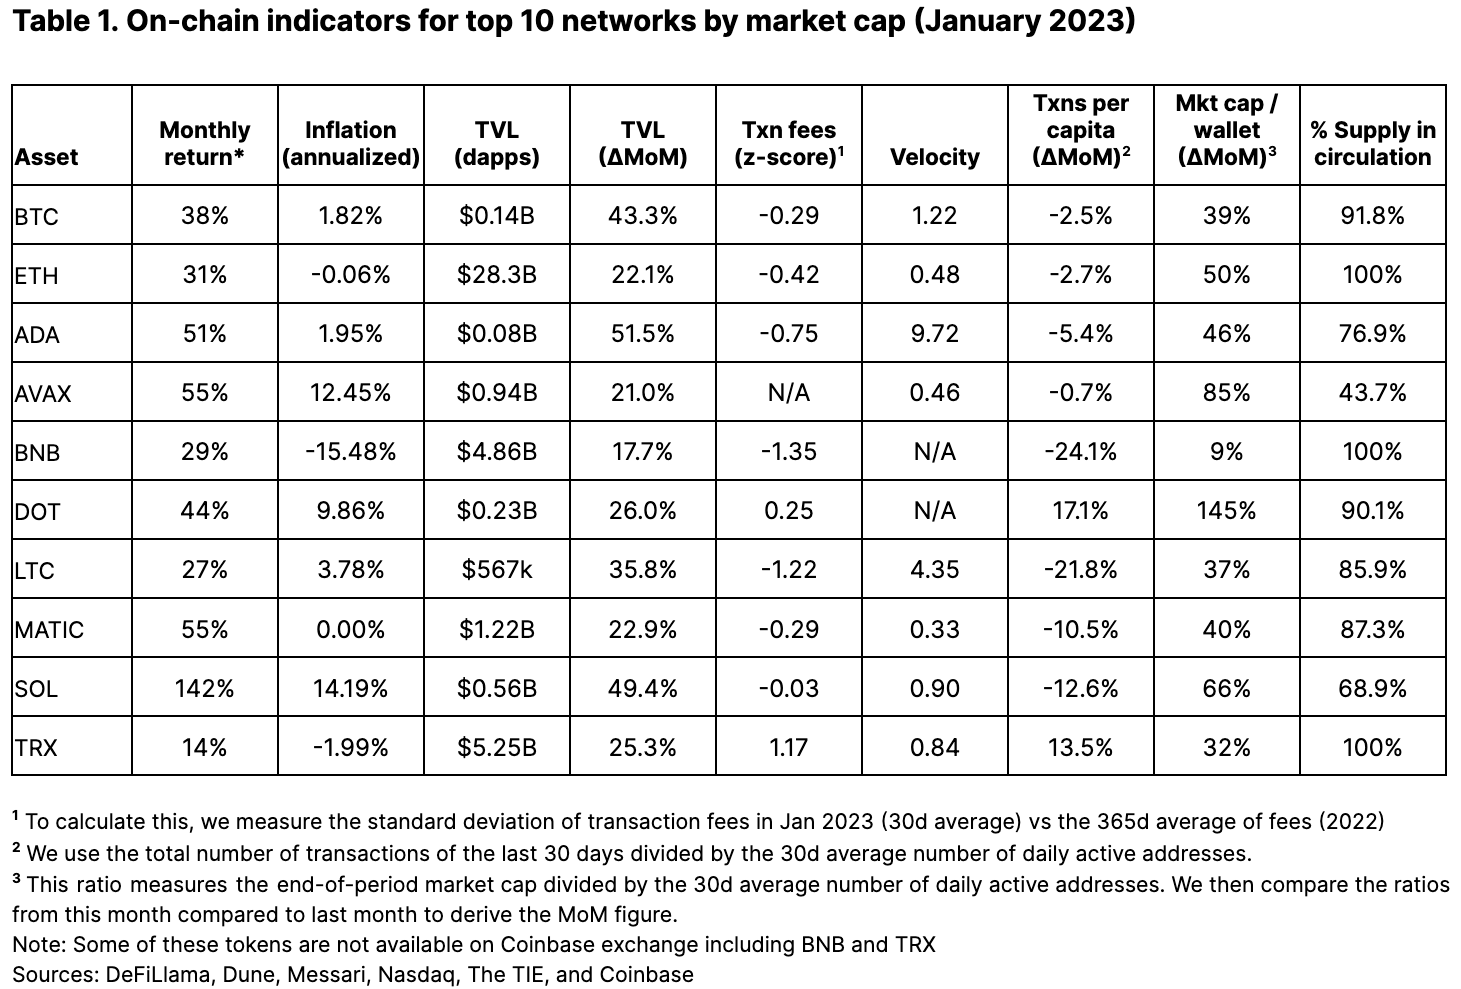 Table 1. On-chain indicators for top 10 networks by market cap (January 2023)